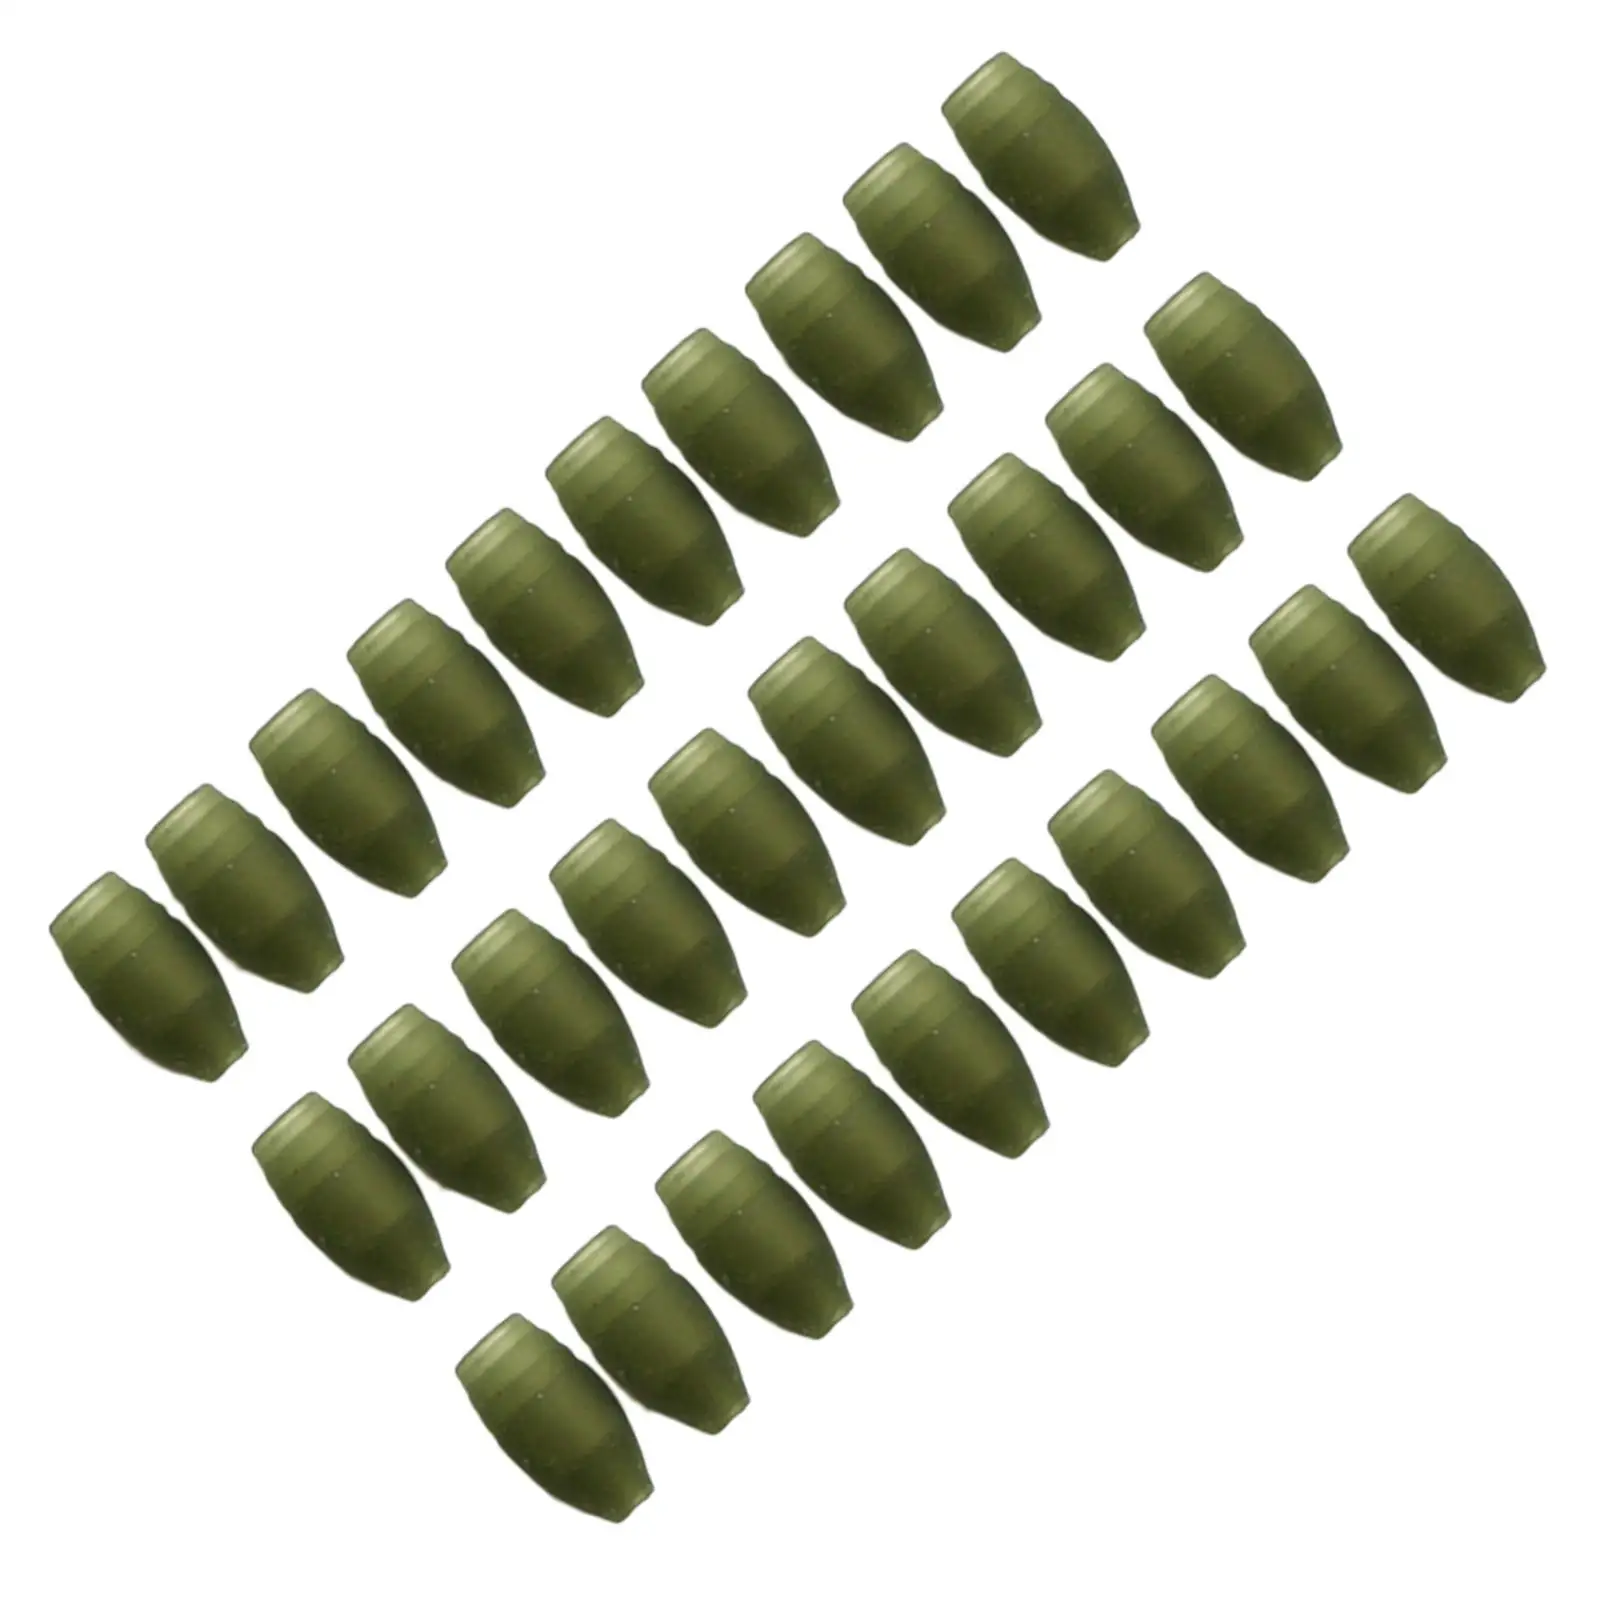 30 Pieces Match Elastic Dacron Connectors Carp Plastic Green Accessories Tool for Pole Tip Fishing Tackle Rigs Solid and Hollow